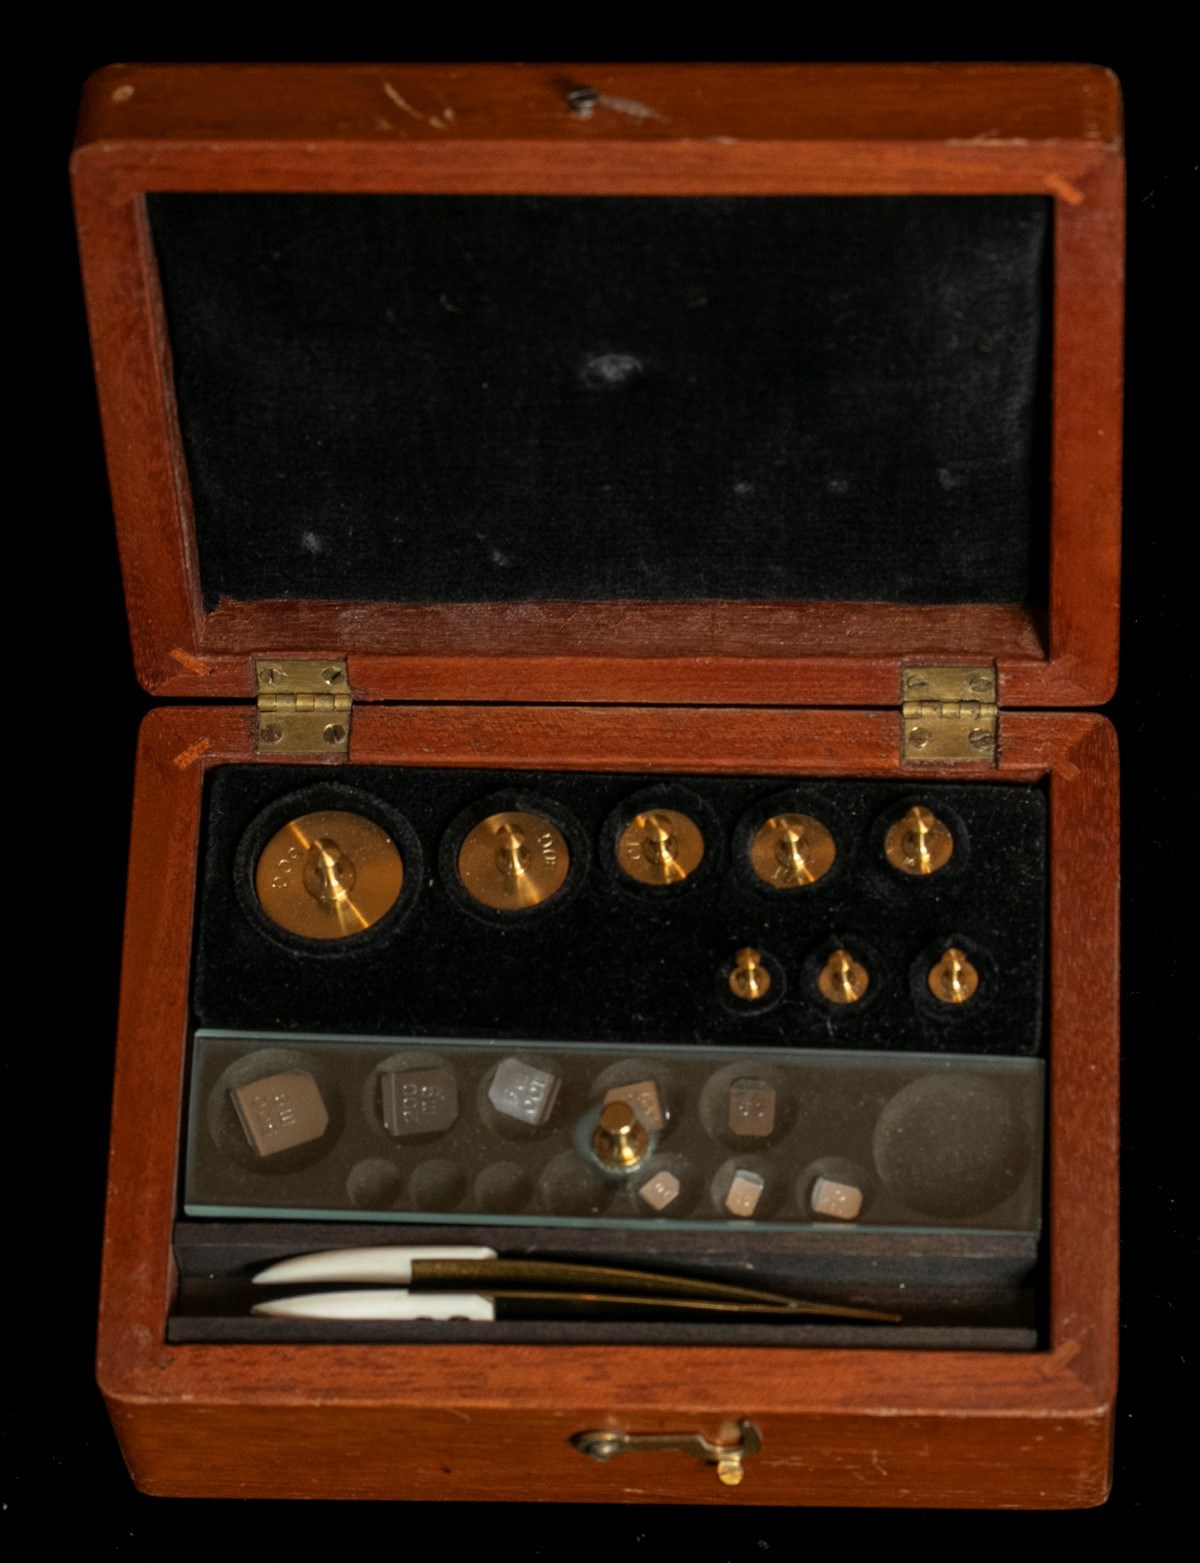 A wooden box containing a set of metal weights.